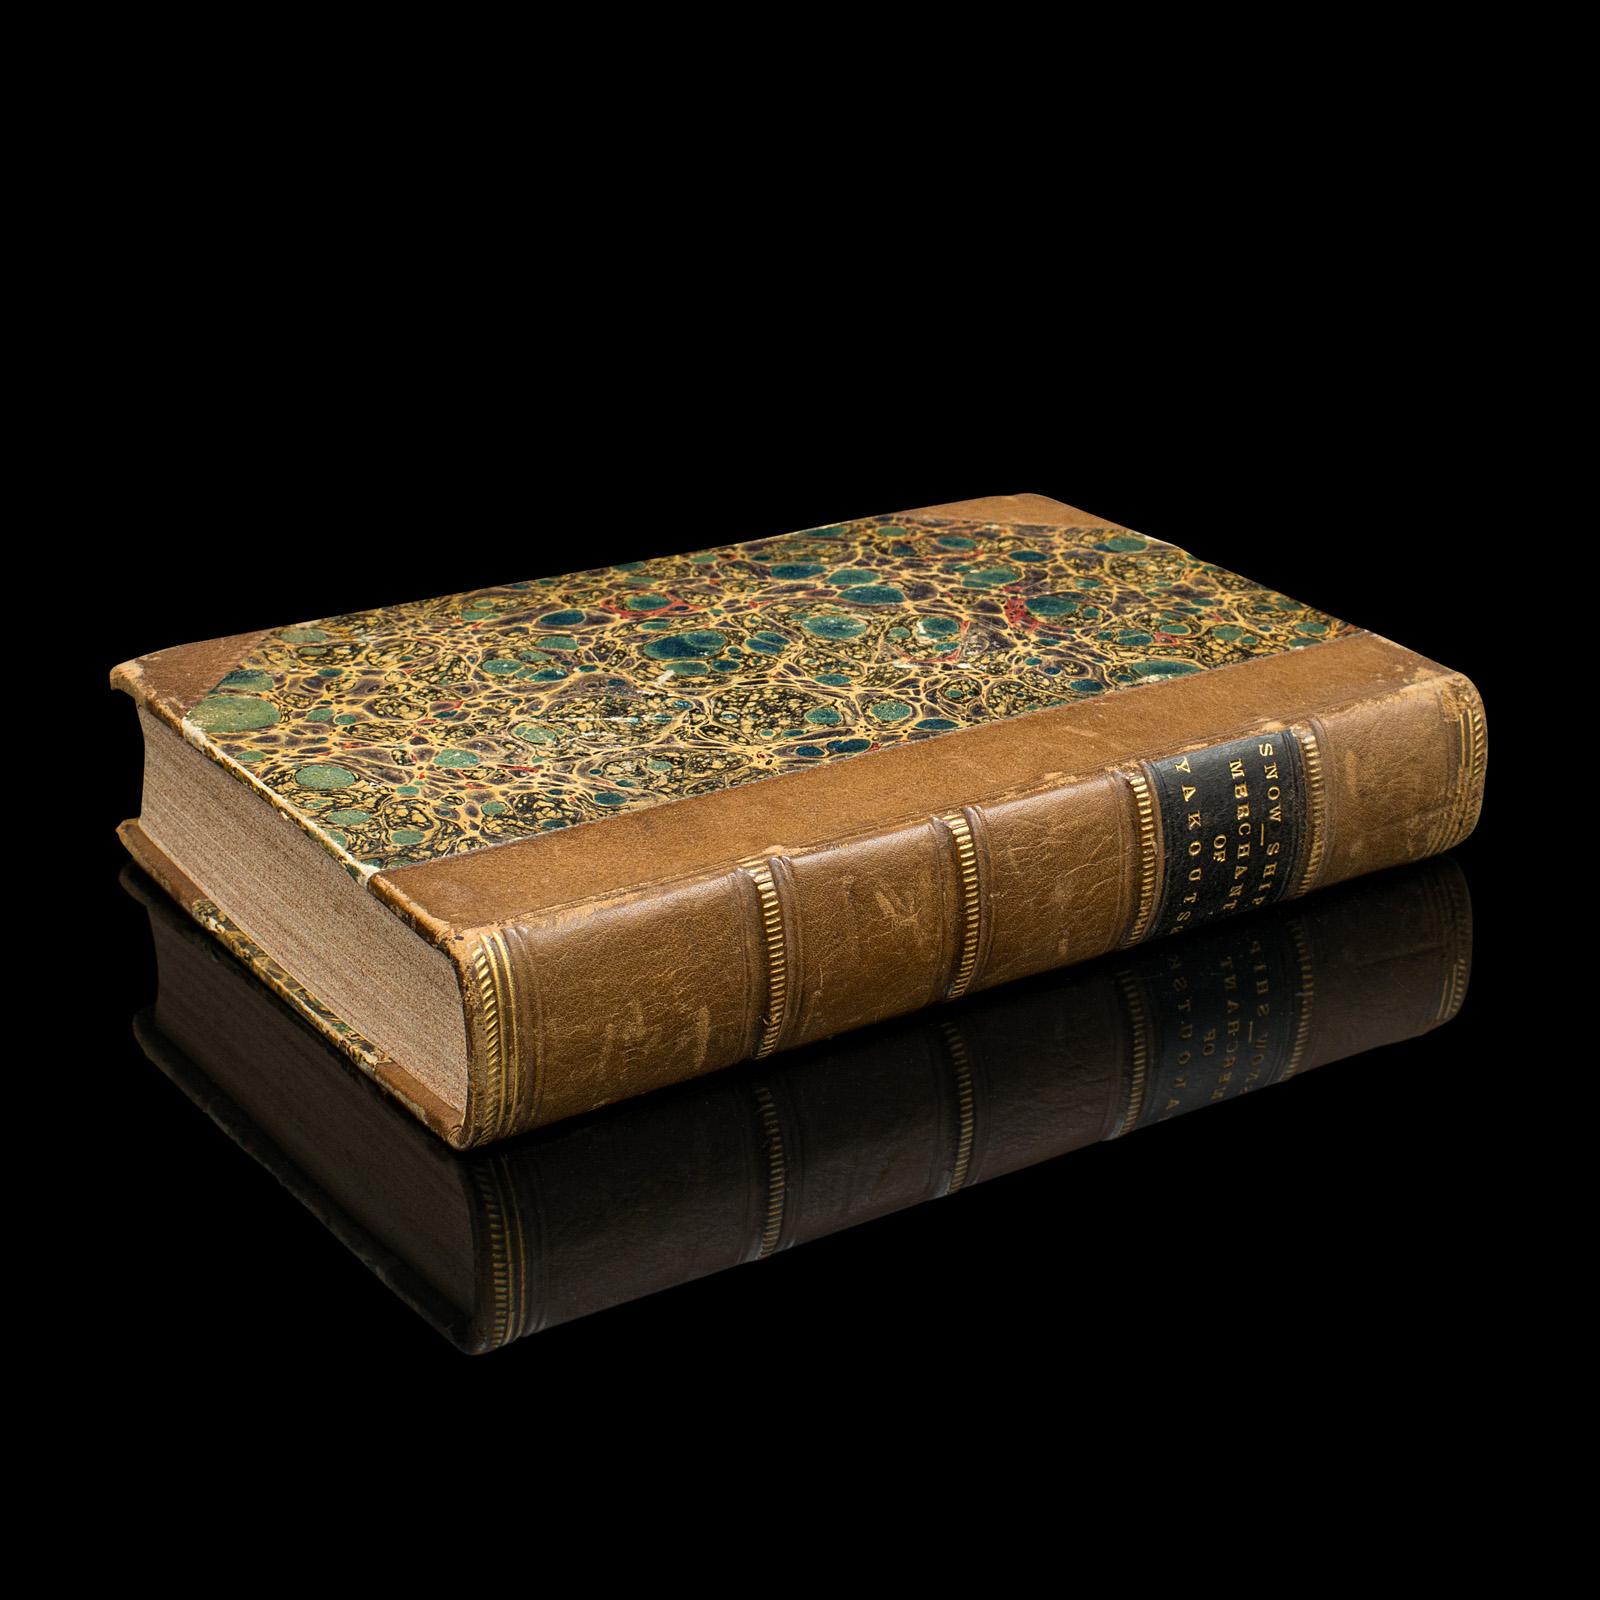 This is an antique novel The Snow Ship by Percy St. John. An English language fiction book with secondary title Merchant of Yakoutsk, dating to the Victorian period, this edition circa 1880.

Percy Bolingbroke St. John (1821 - 1889) was an English